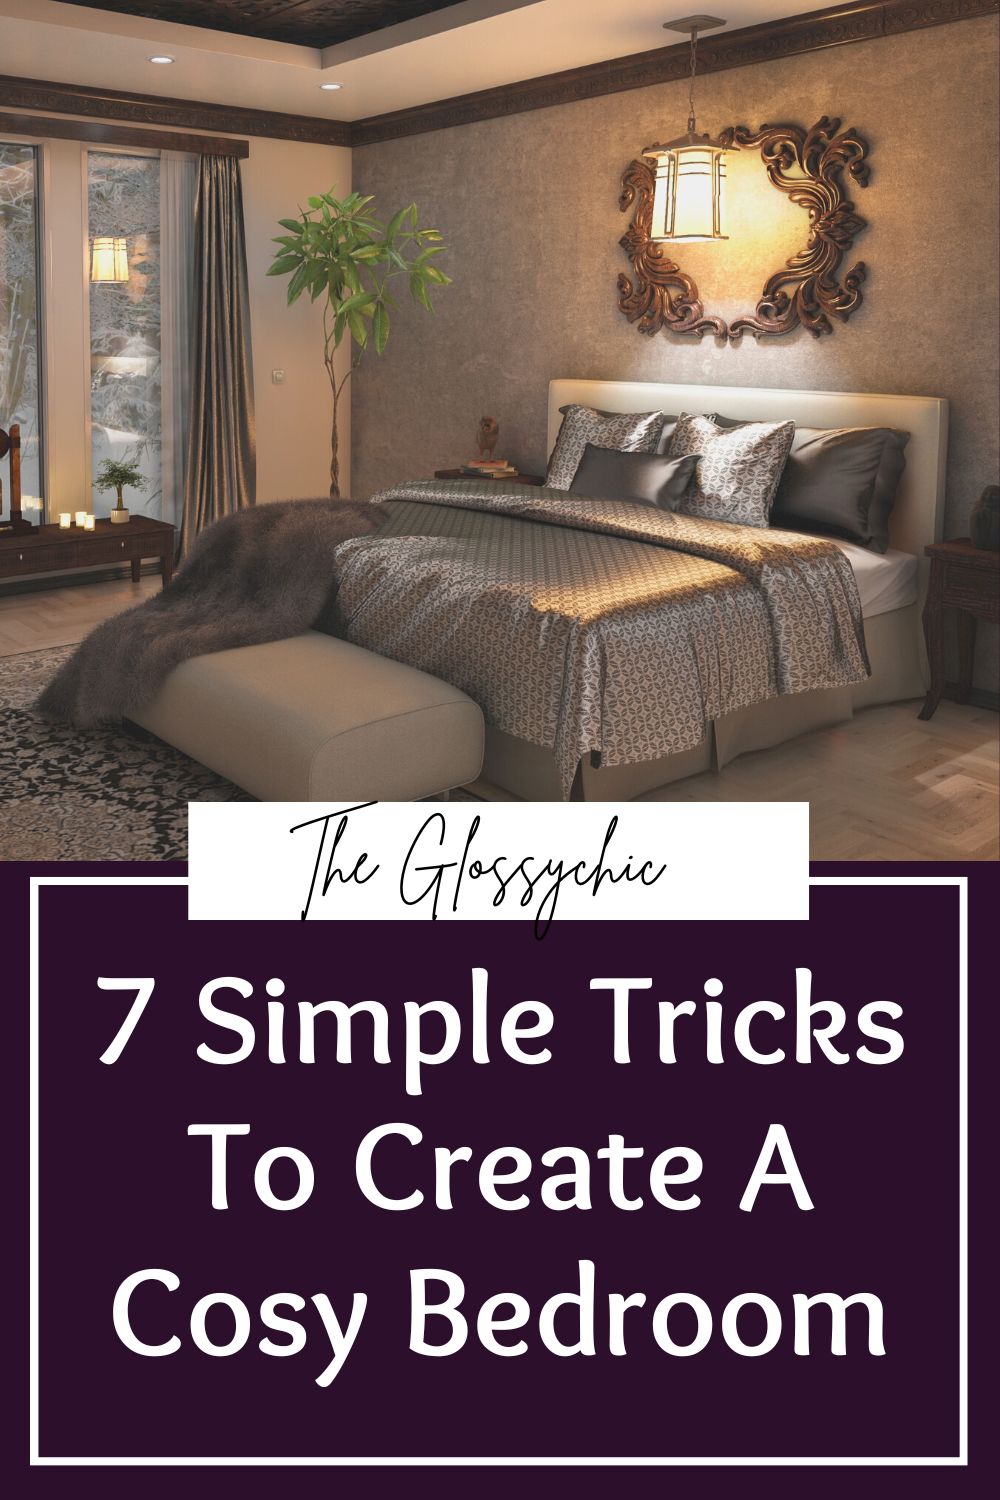 7 Simple Tricks To Create A Cosy Bedroom